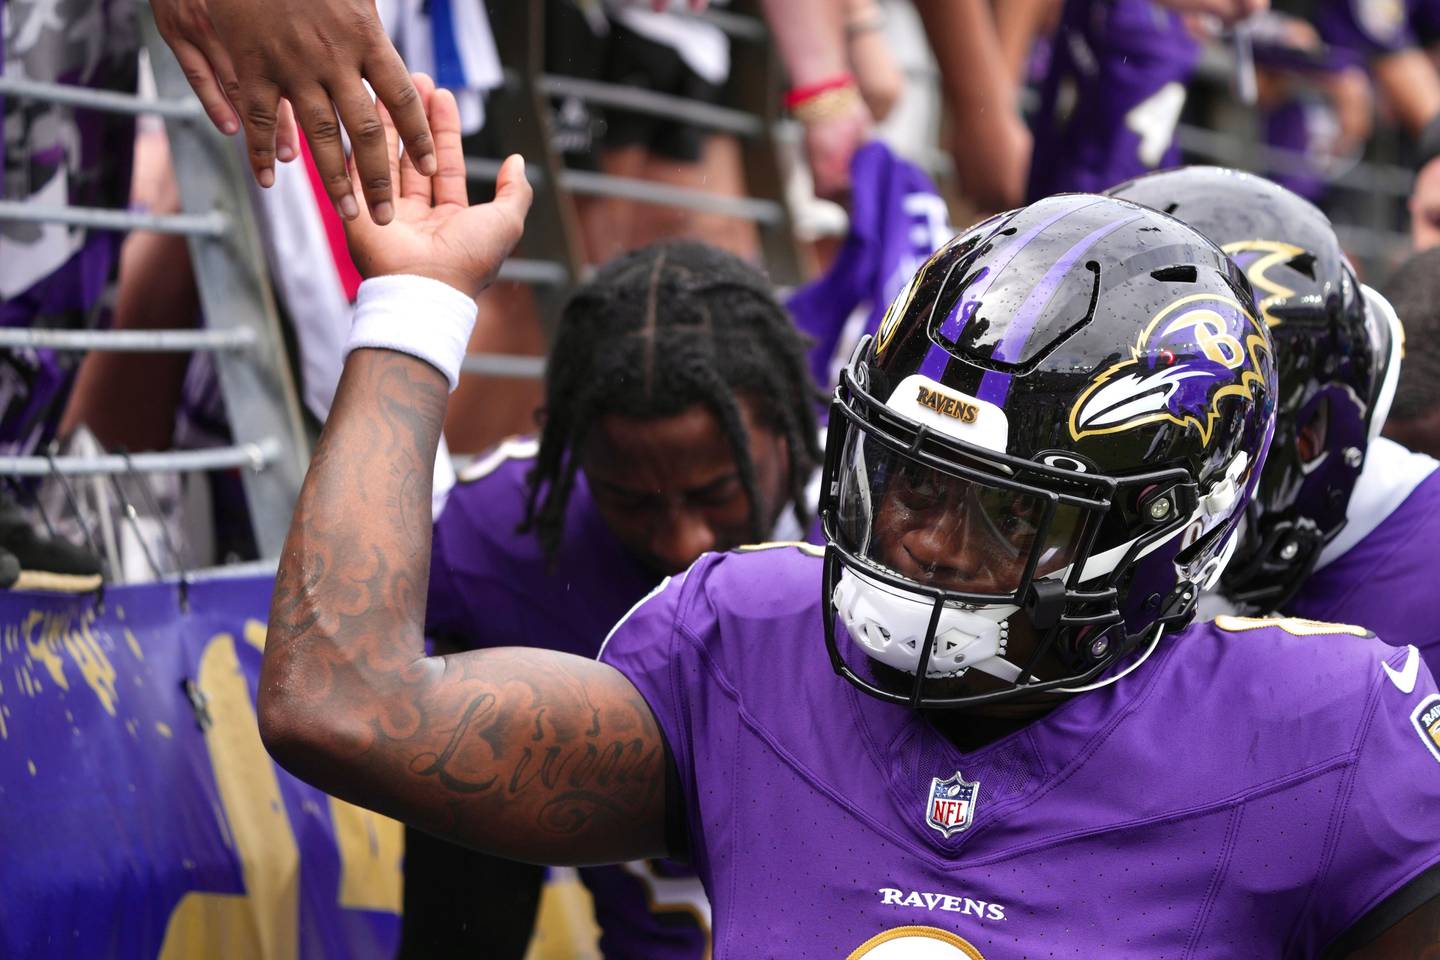 Ravens quarterback Lamar Jackson slaps hands with fans at M&T Bank Stadium before the Ravens face the Texans in the season opener against the Houston Texans.